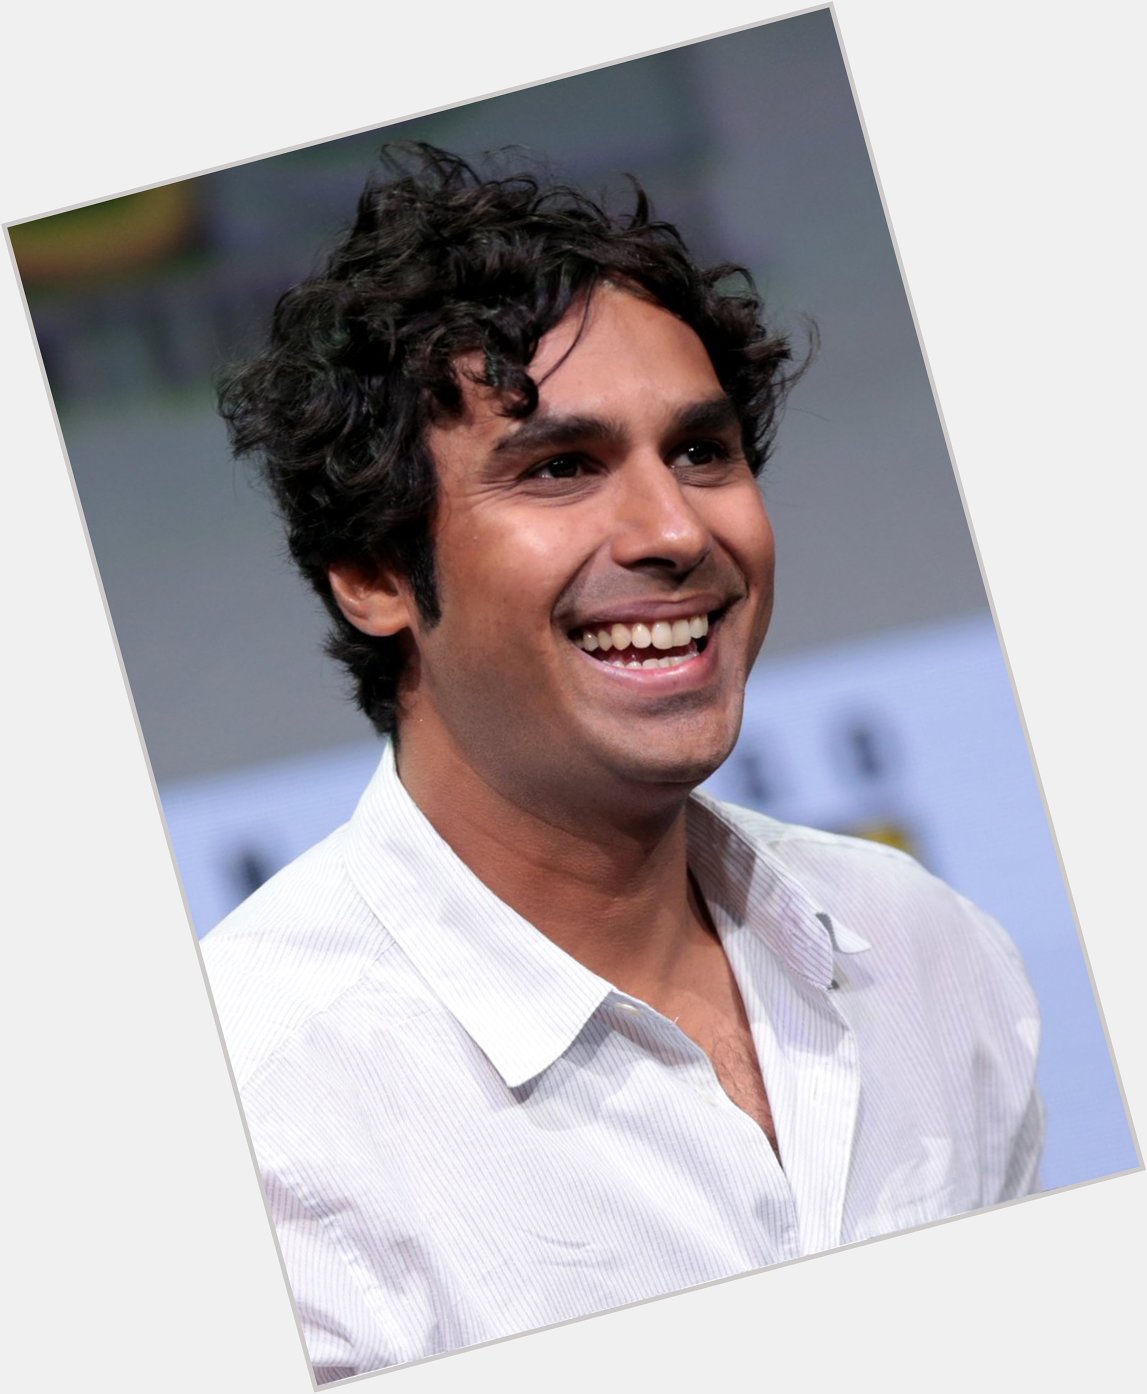 Happy birthday Kunal Nayyar you are 41 years old today and your great as Raj Koothrappali in The Big Bang Theory. 